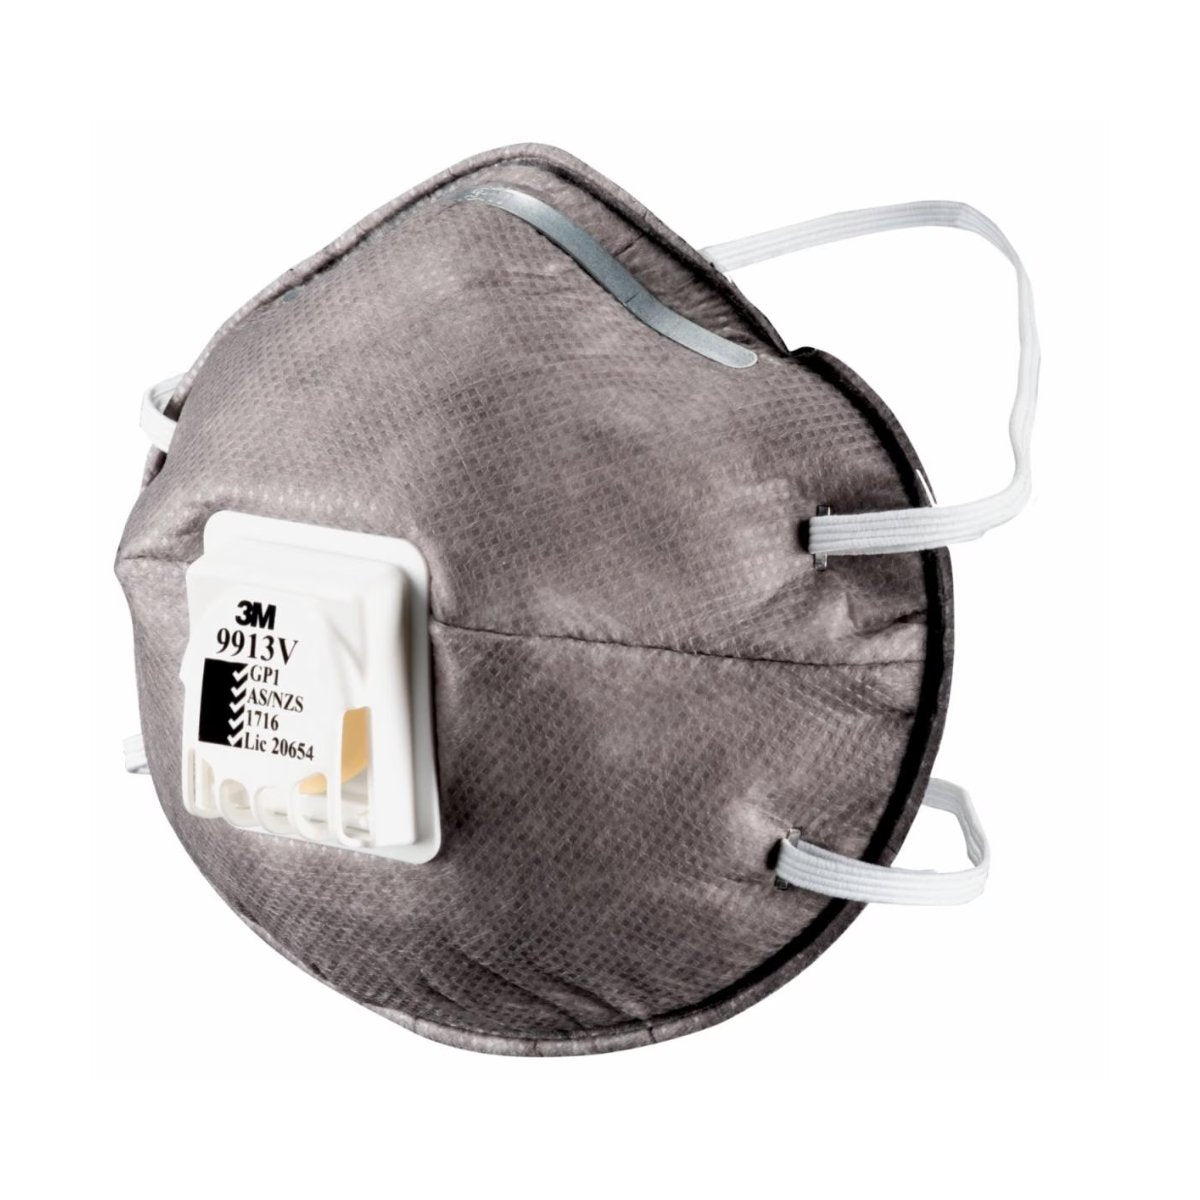 3M™ Cupped Particulate Respirator 9913V, GP1 with valve, with Nuisance Level* Organic Vapour Relief (Pack of 10)